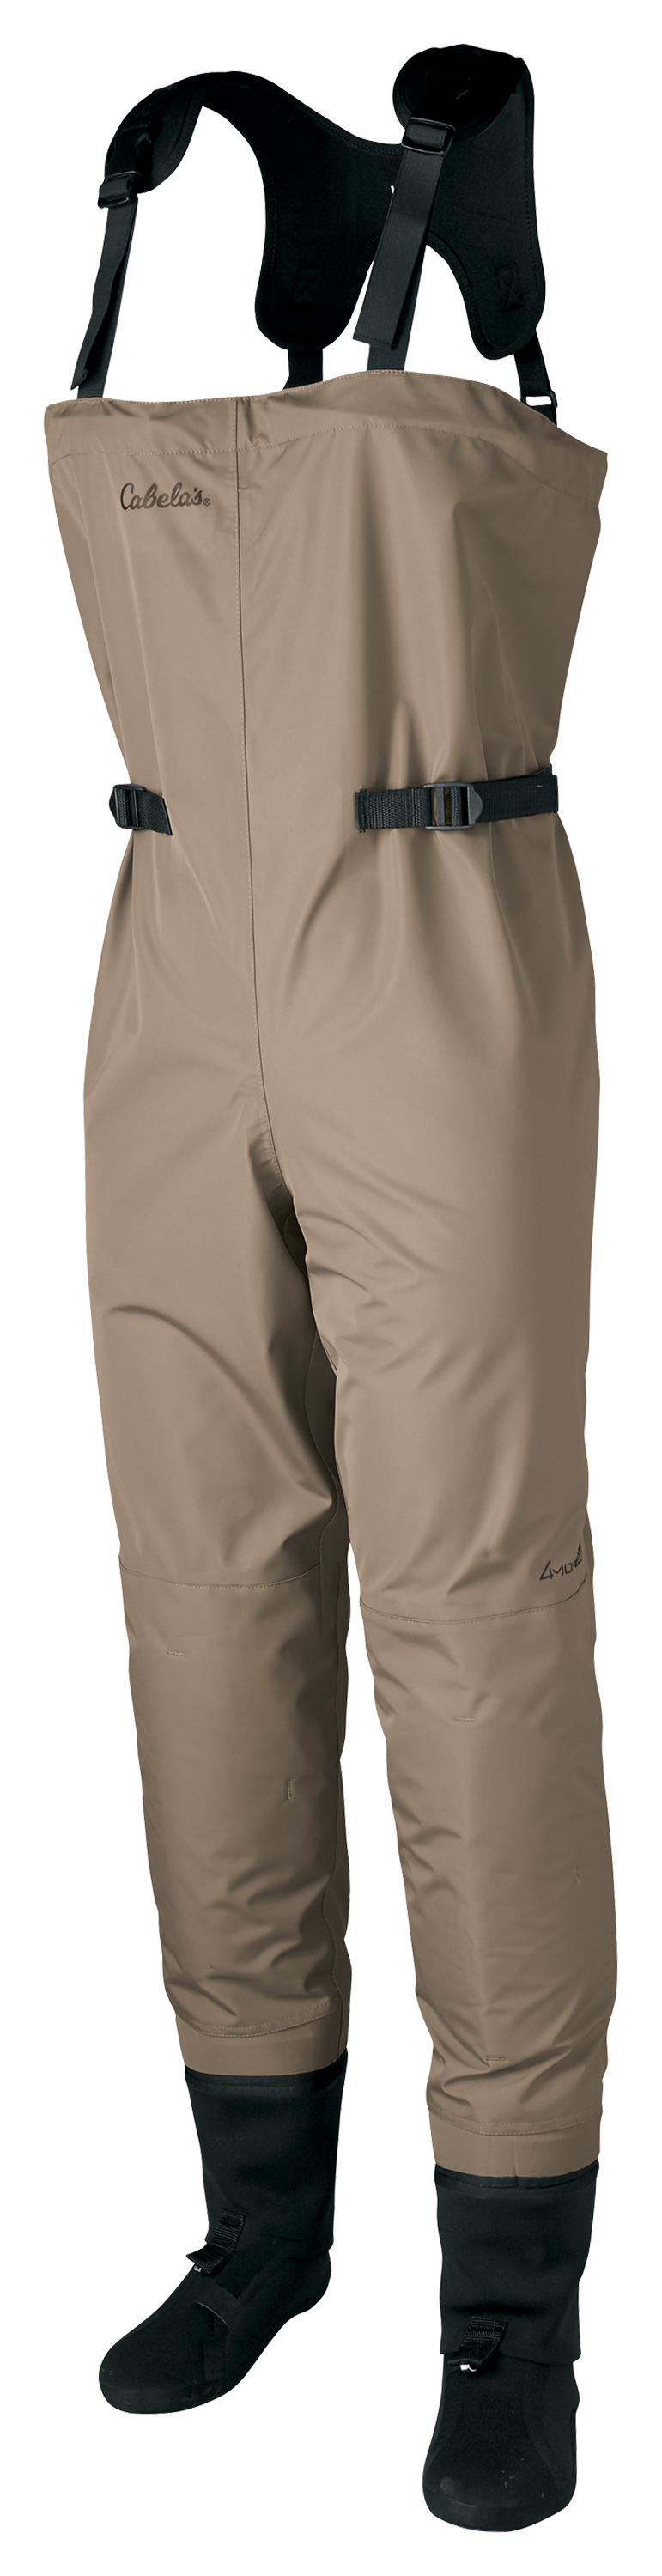 Cabela's Premium Breathable Stocking-Foot Fishing Waders for